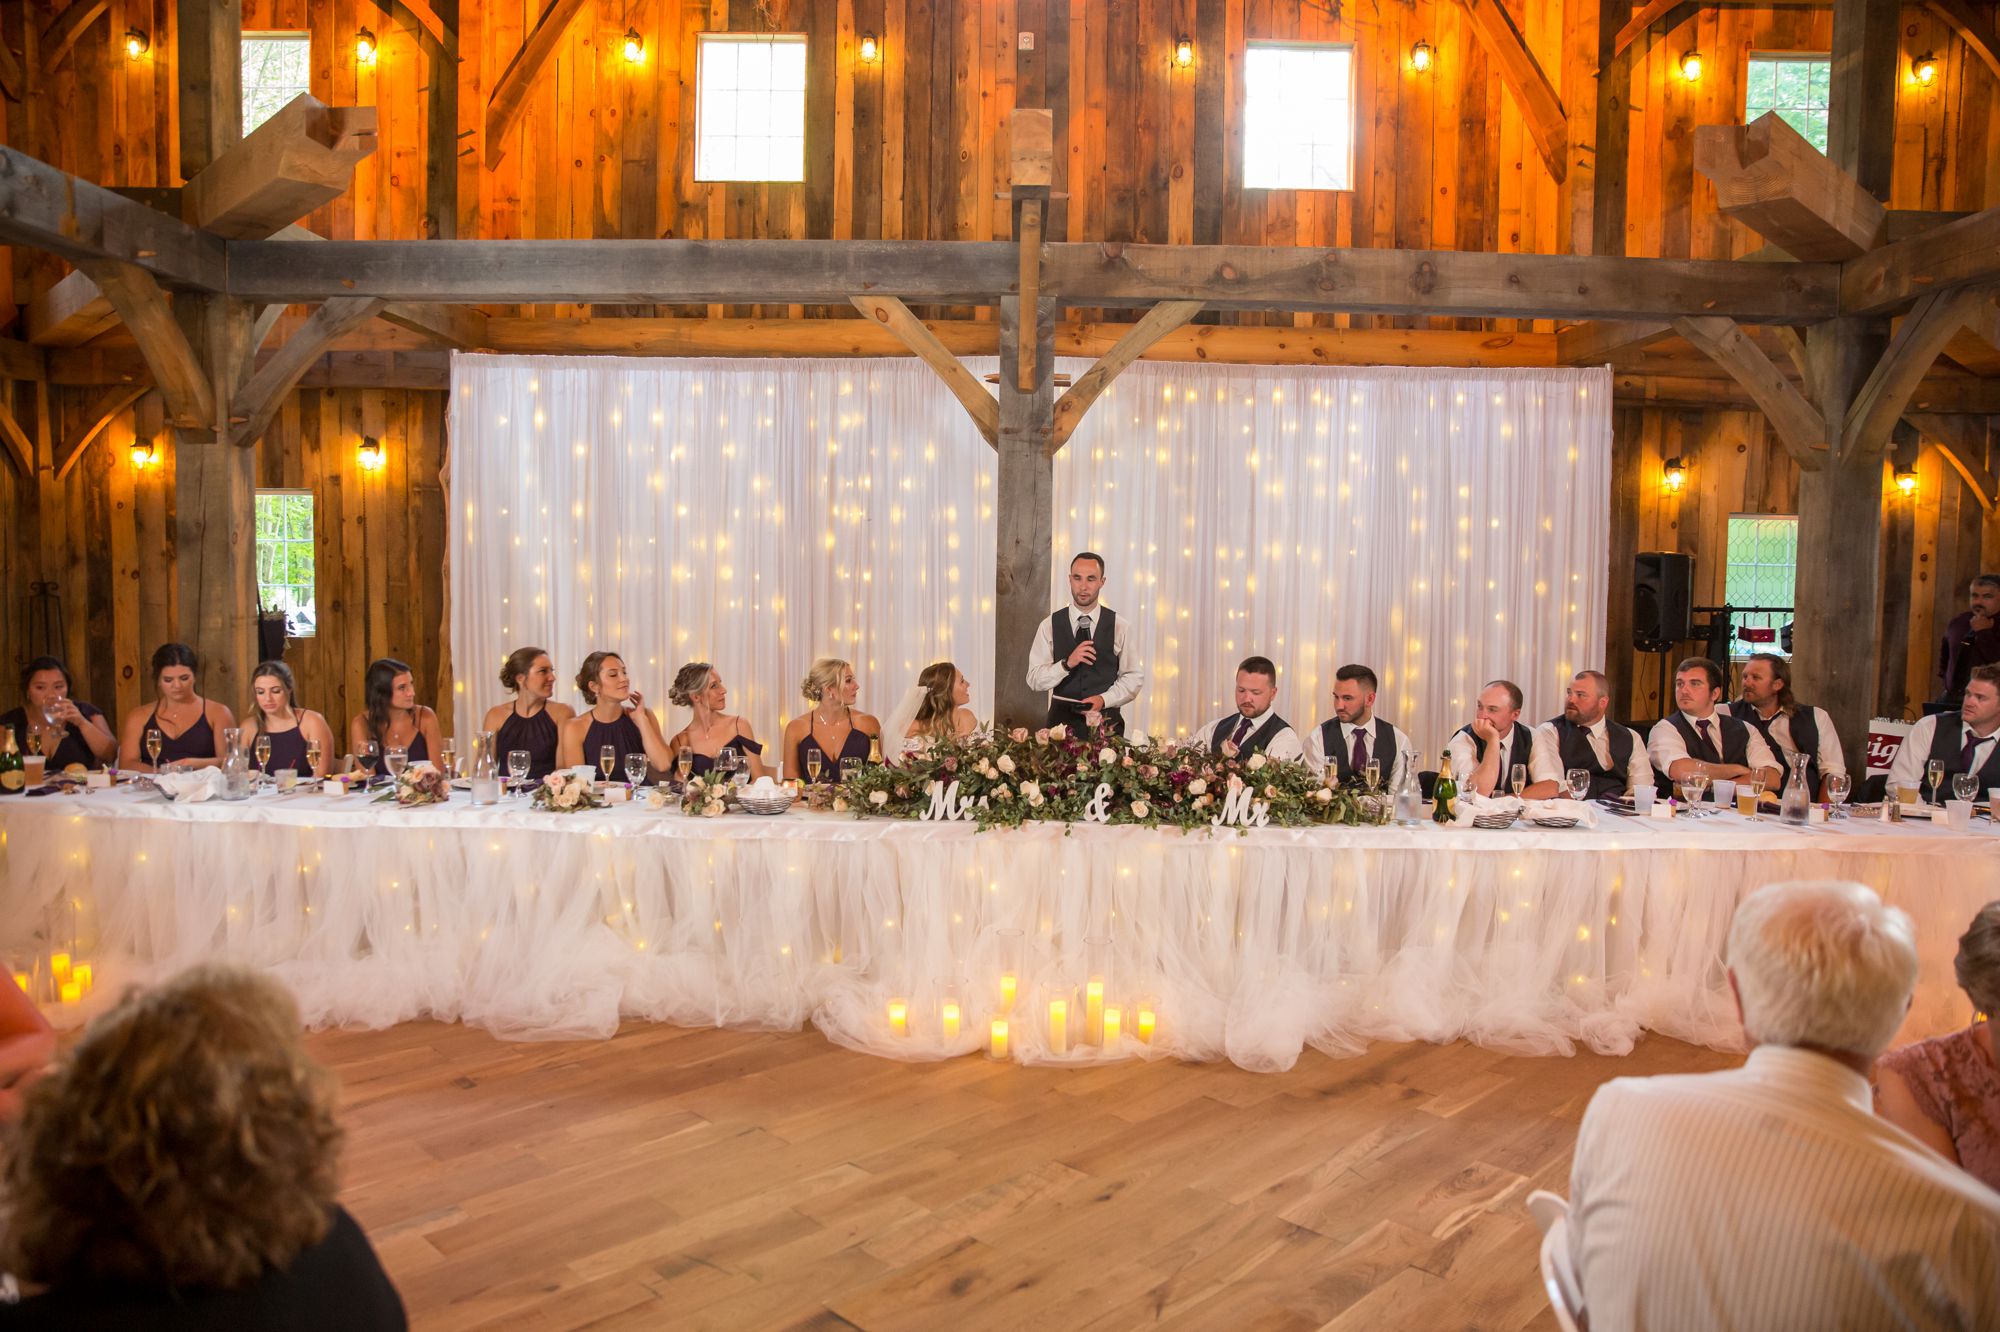 A candid moment during wedding reception at The Swan Barn Door